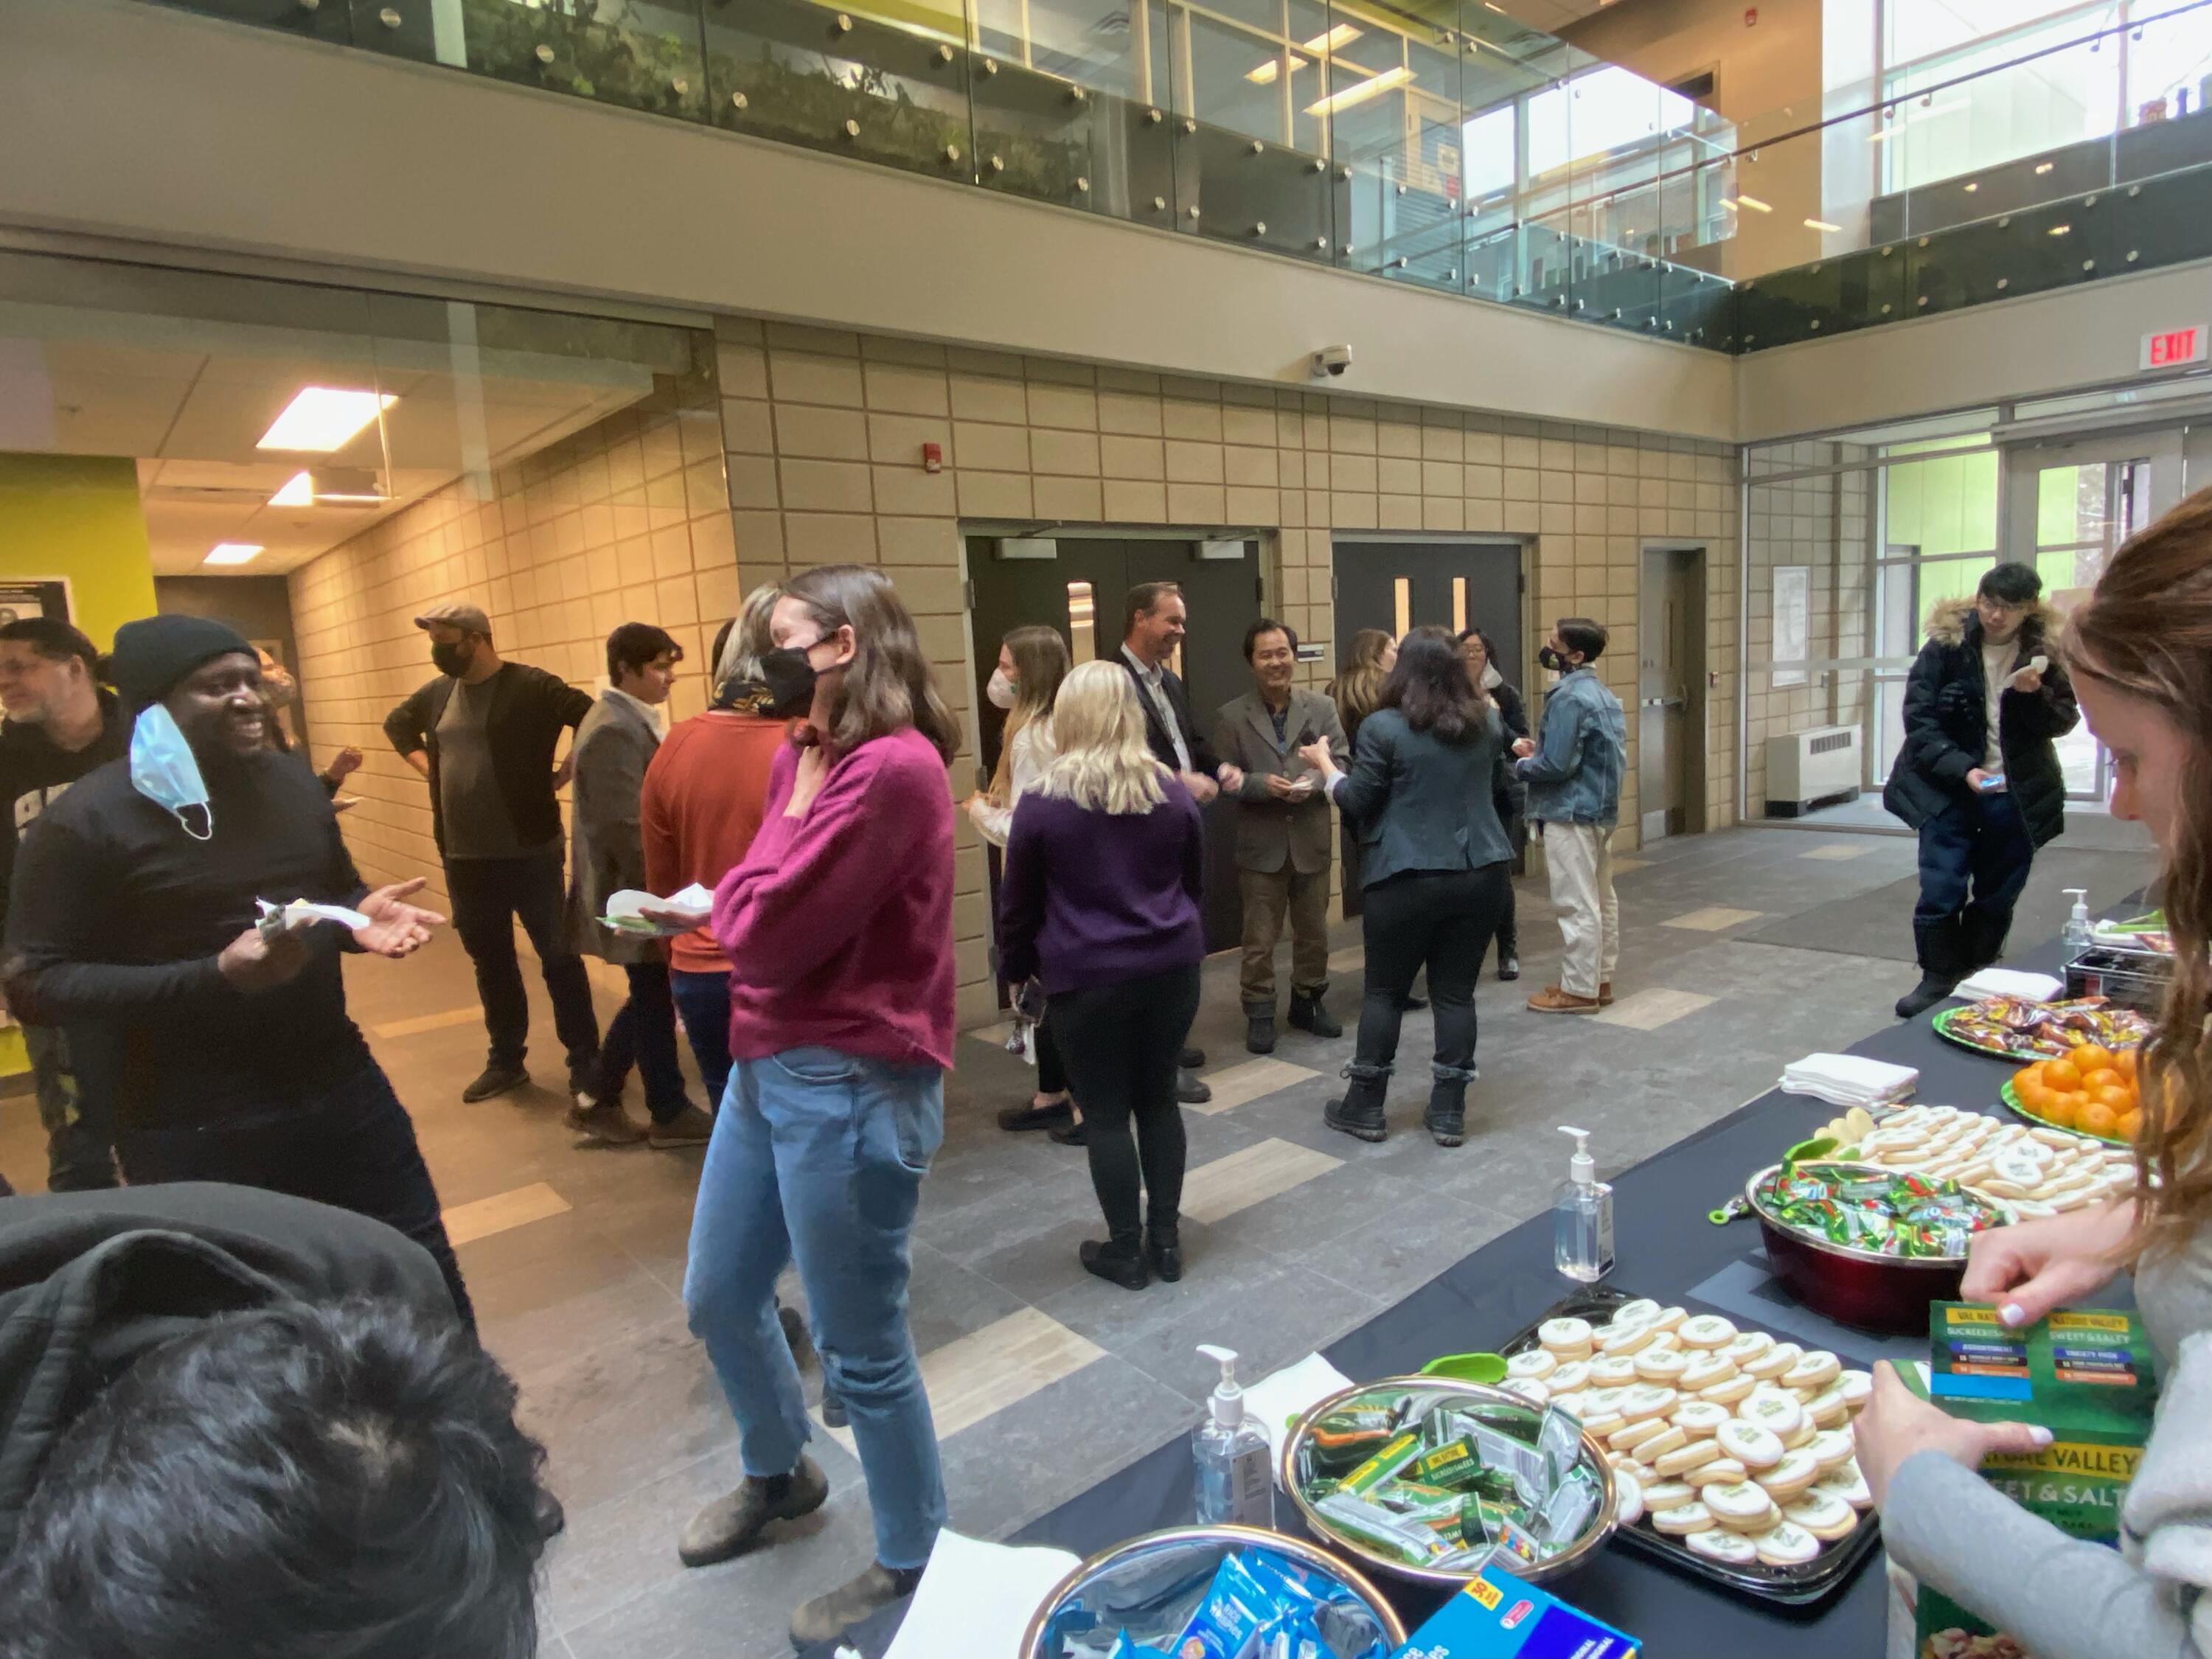 Faculty, students and staff socializing